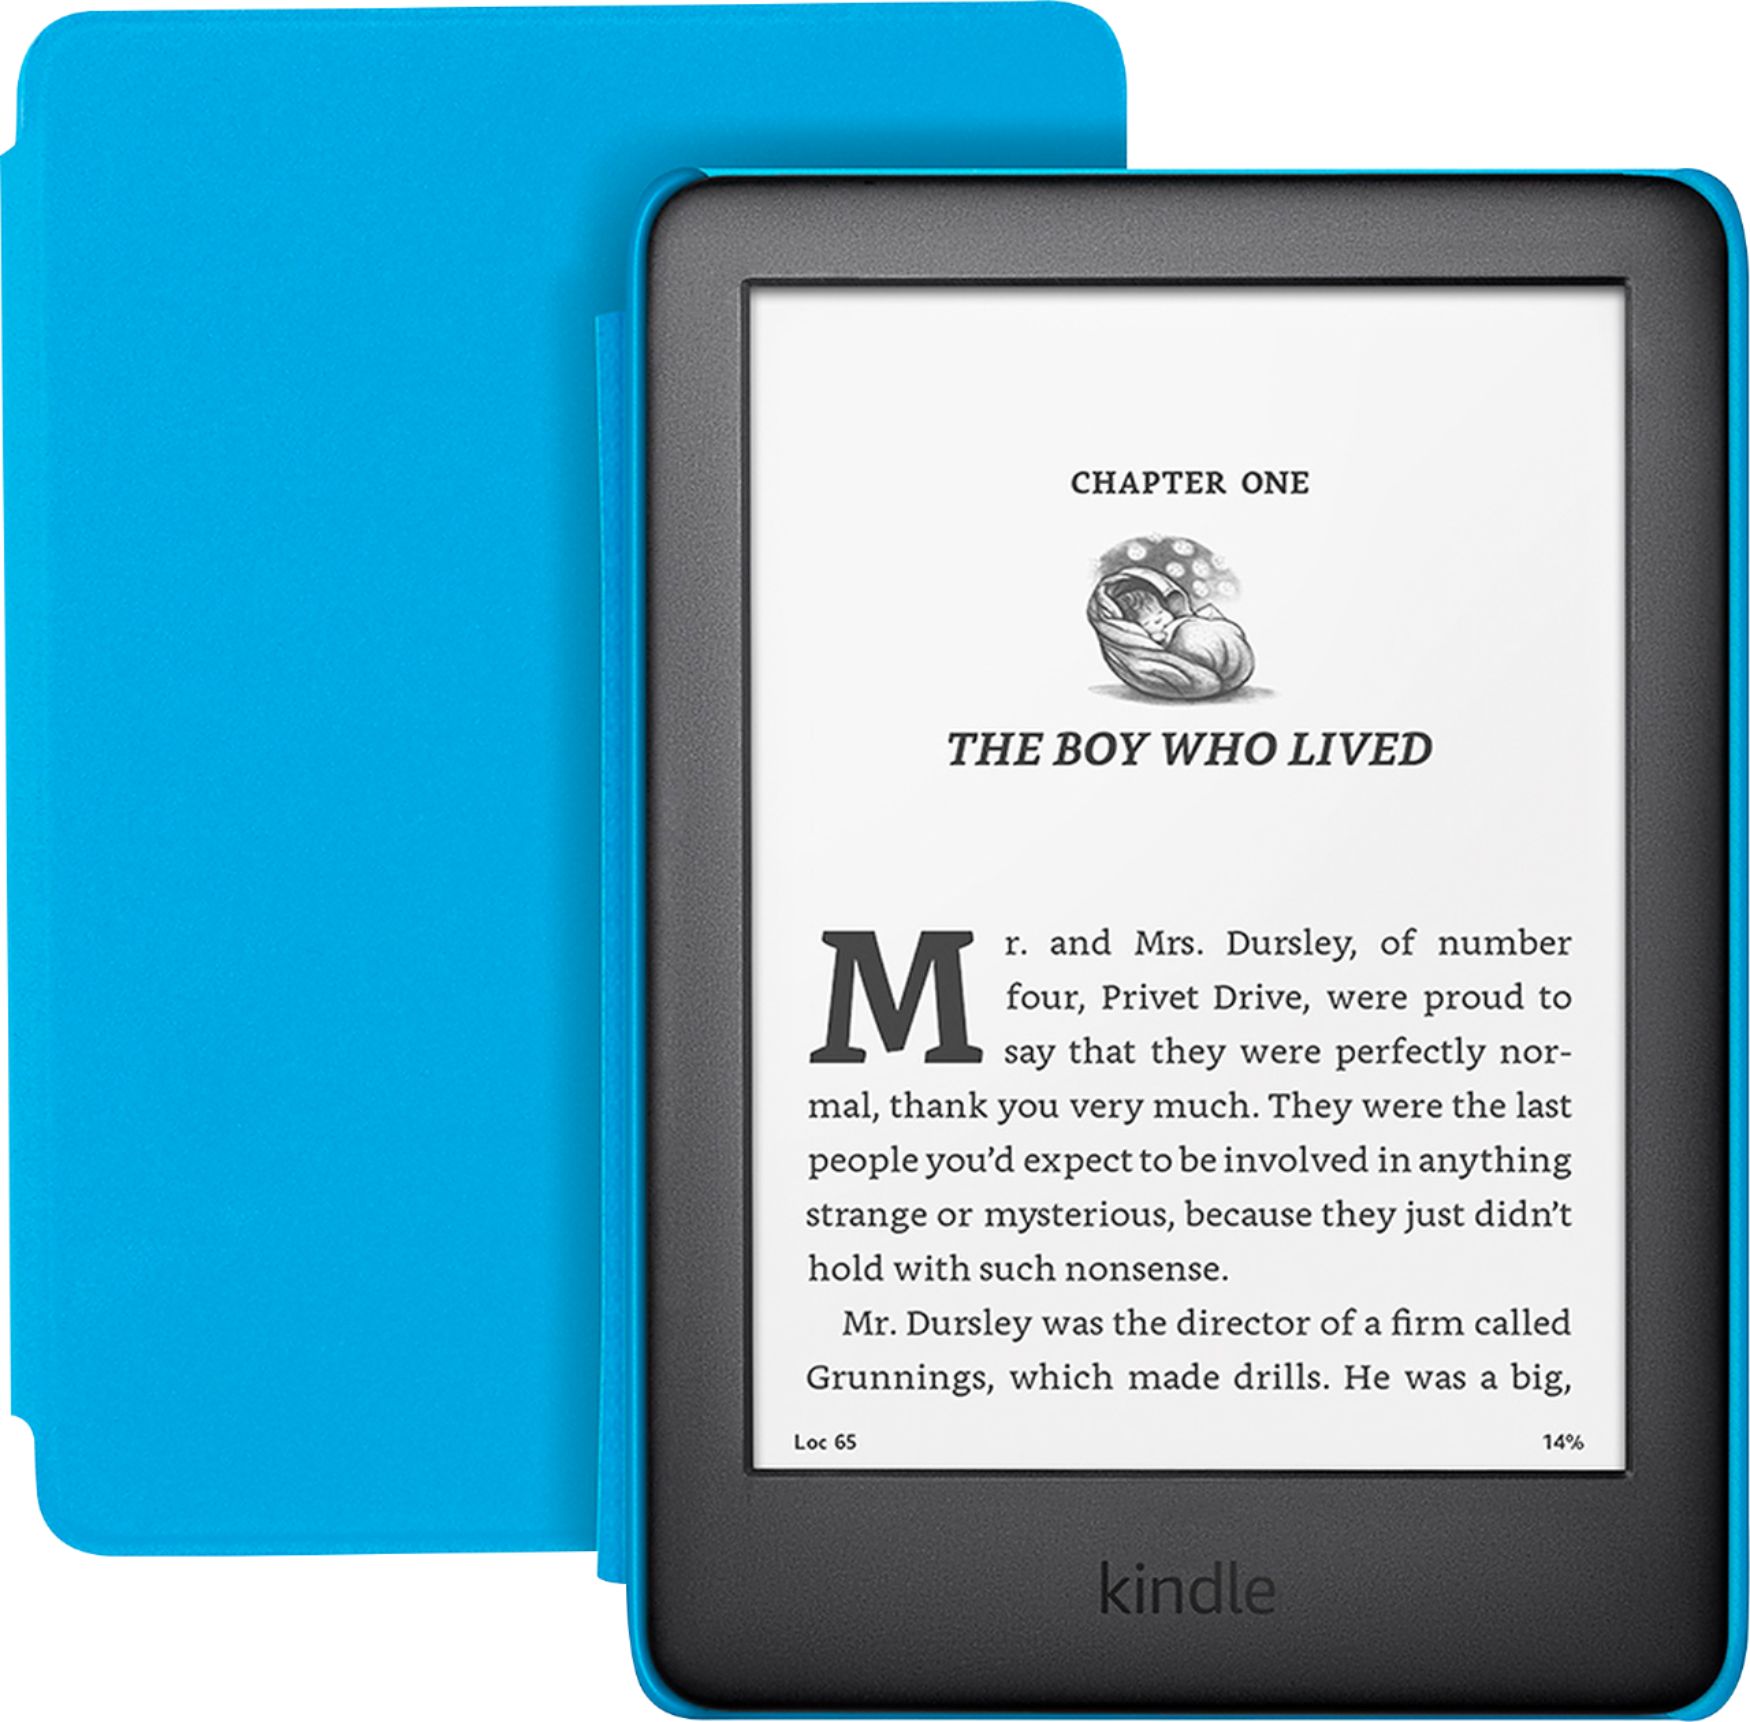 Kindle Paperwhite NOW Waterproof 6 10th Generation 8GB—with Ads Blue